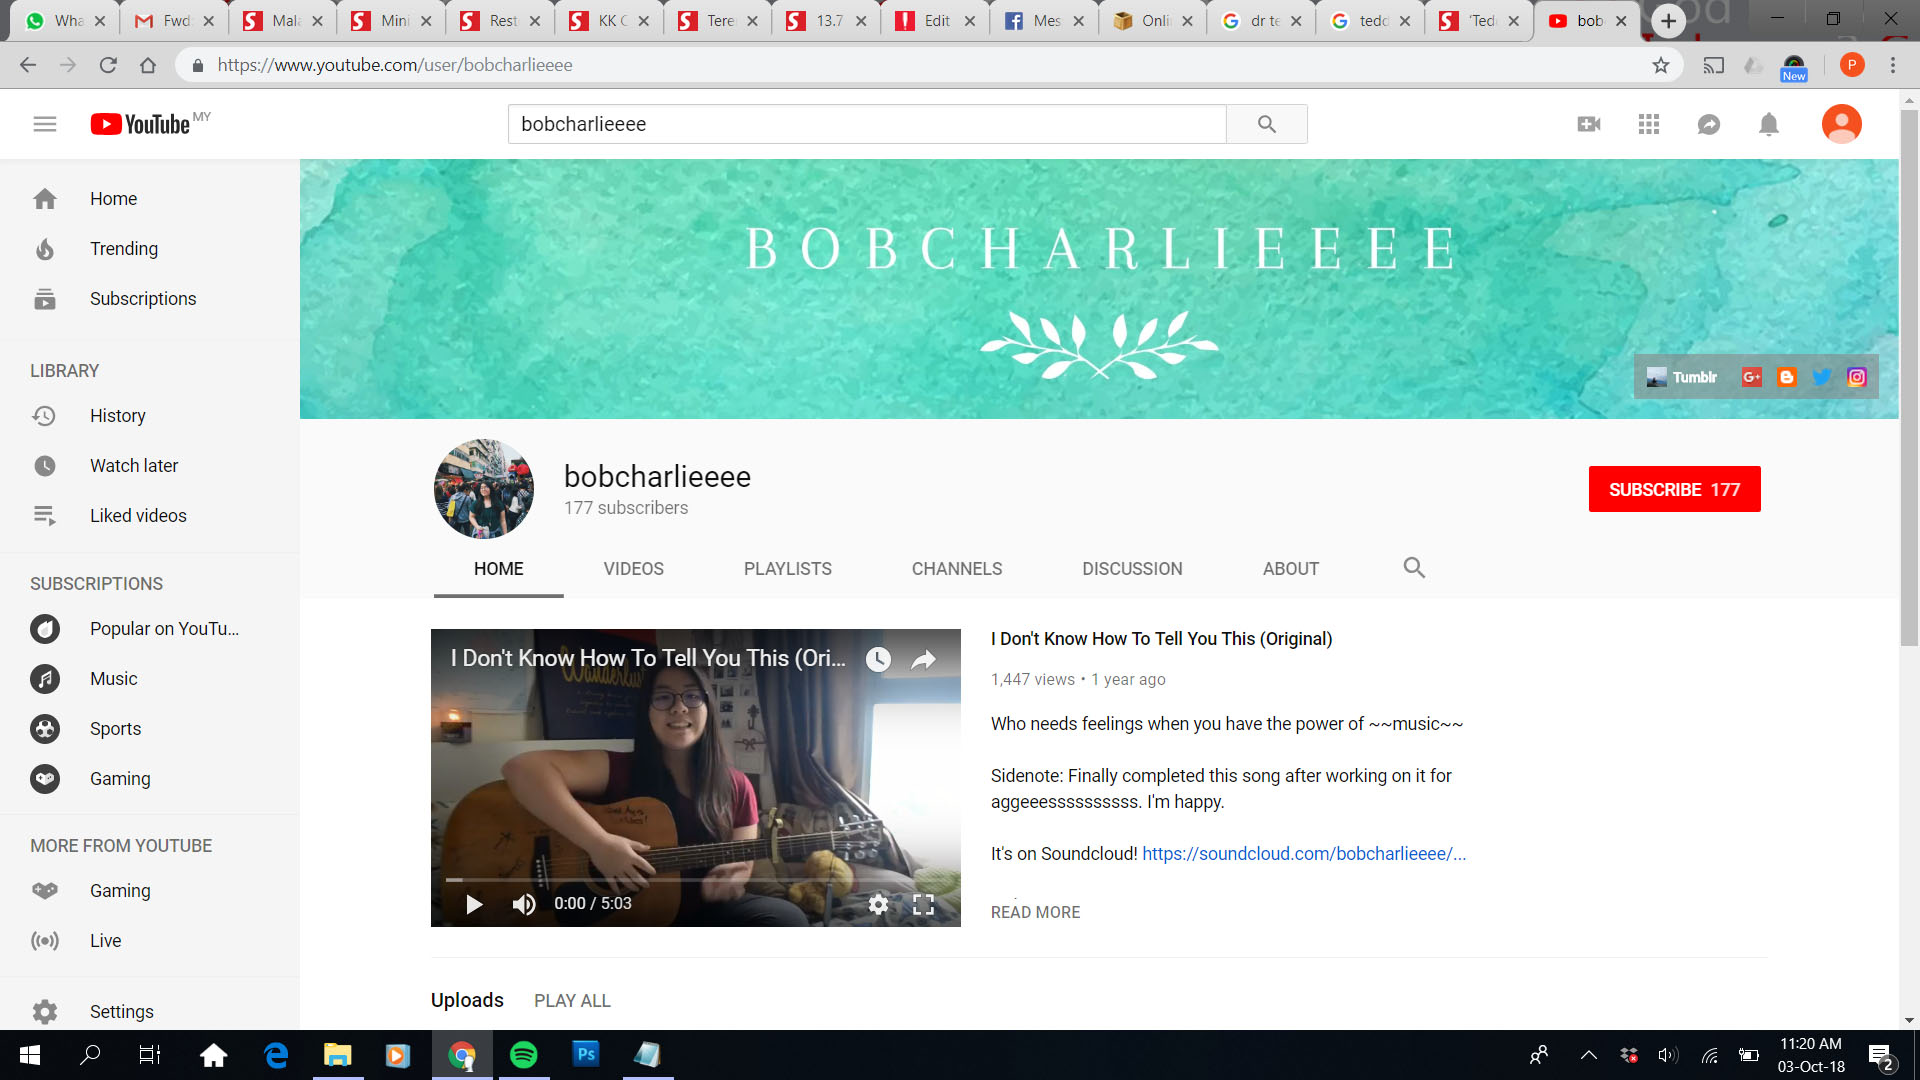 Faith thought the name Bob is cool so she added Charlie who is a name of another YouTuber. She added extra E's so it won't look lame. Screengrab from YouTube